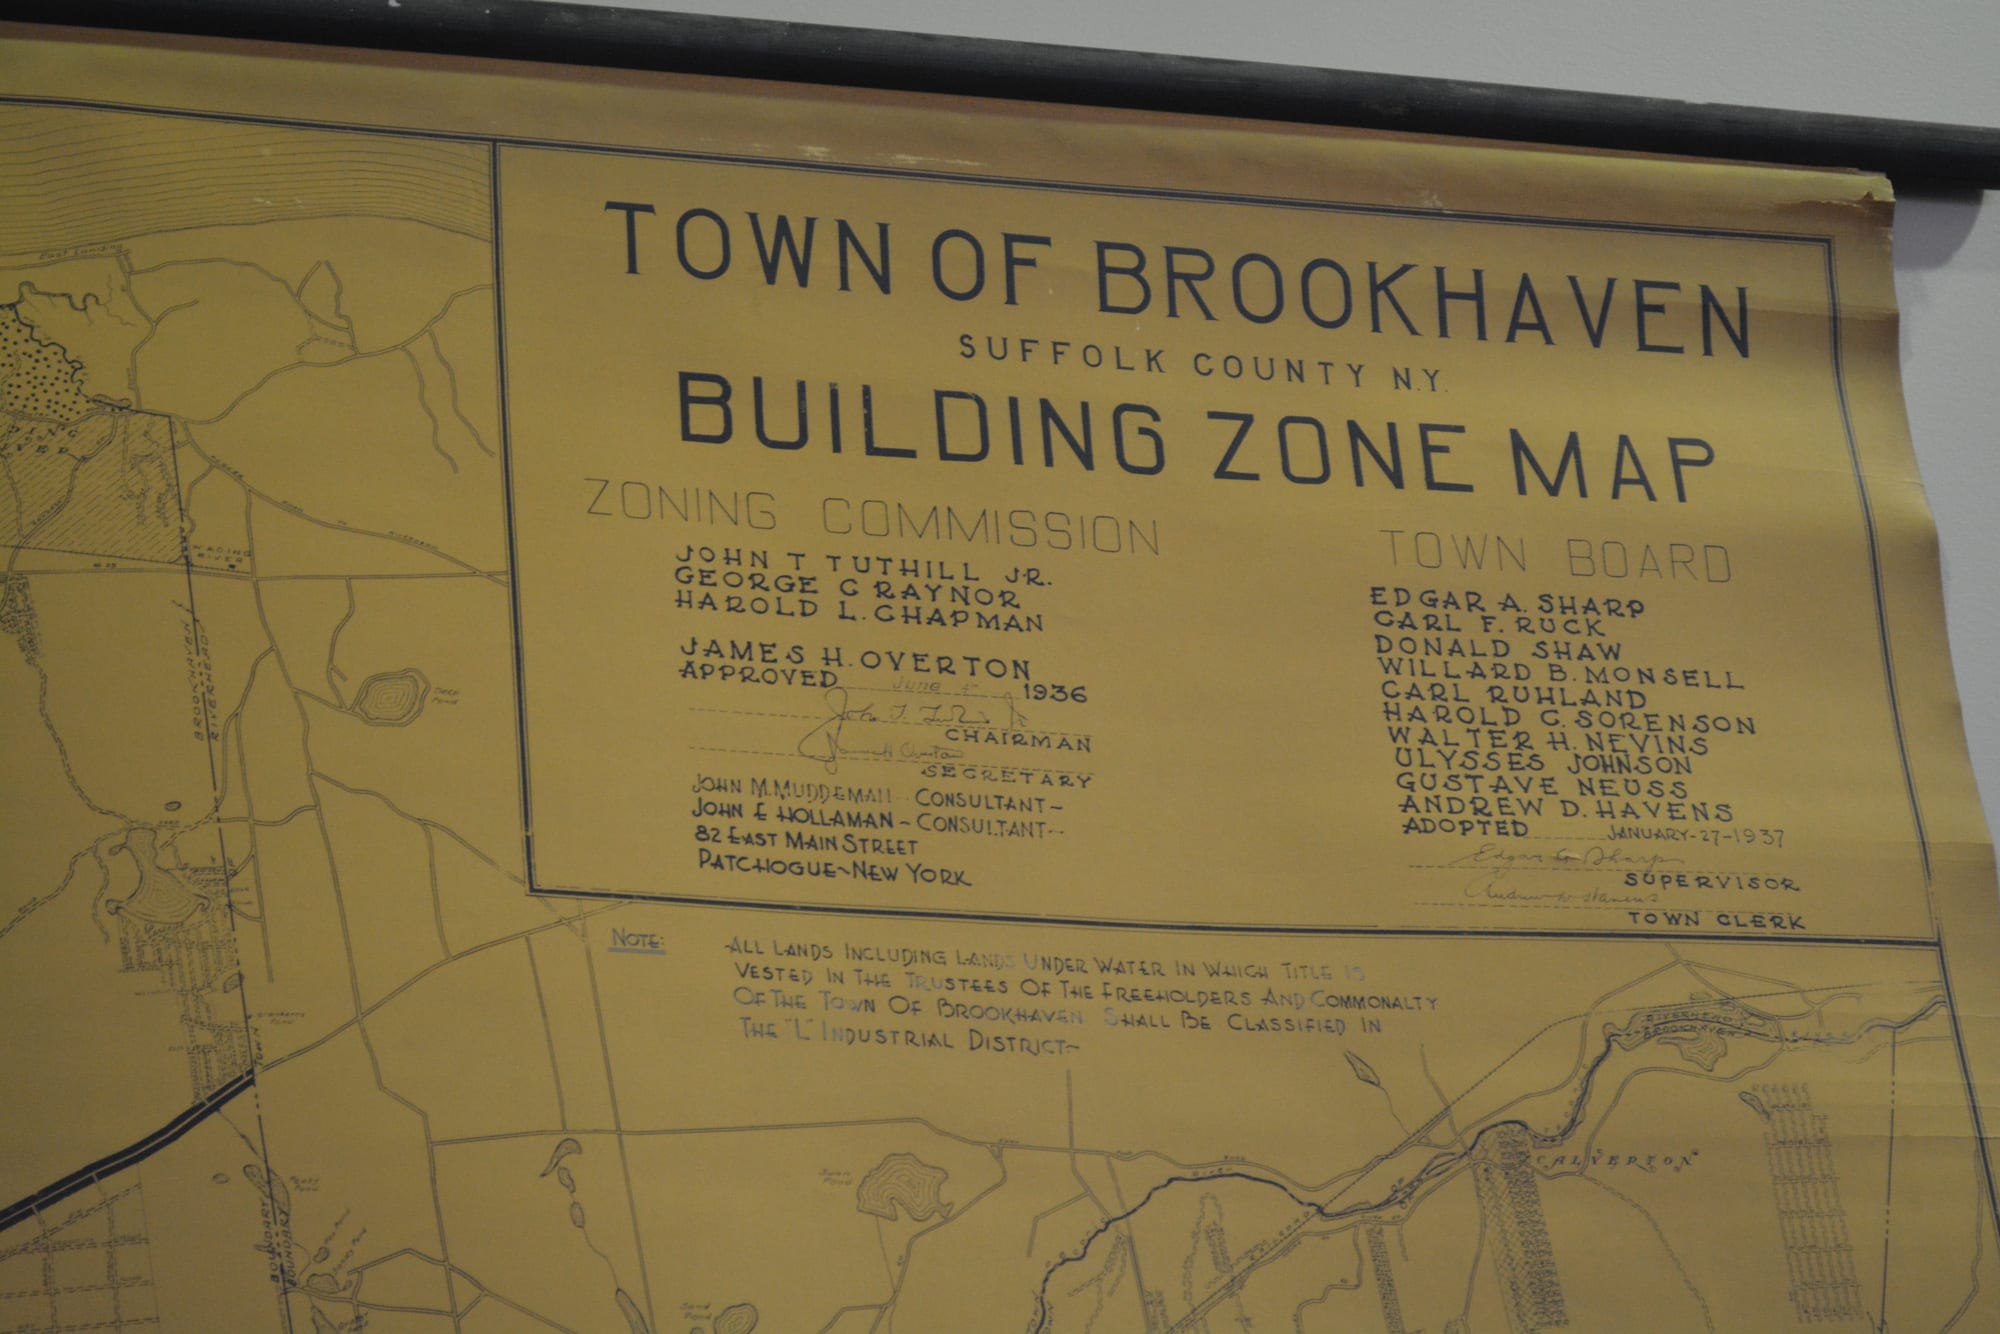 brookhaven-comes-full-circle-on-360th-anniversary-tbr-news-media